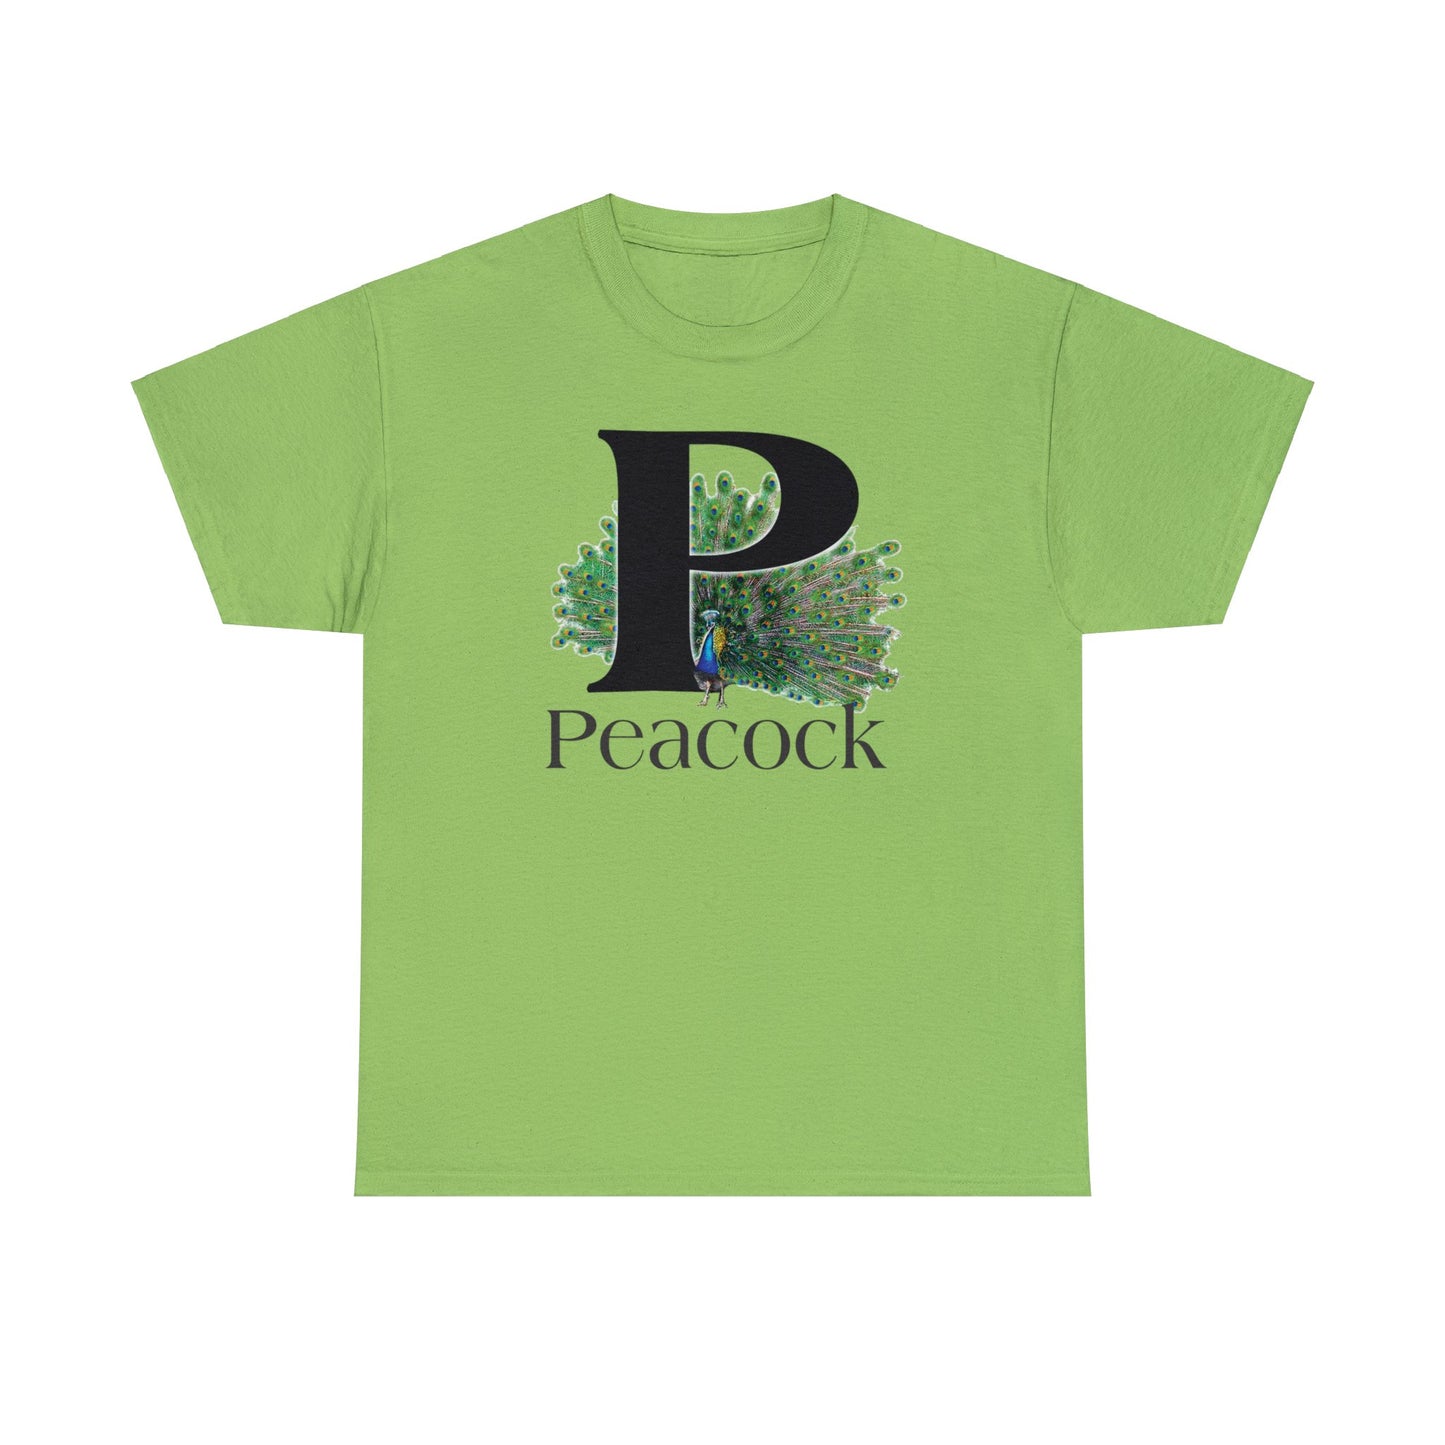 P is for Peacock T-Shirt, Peacock Feathers Fanned out, Bird Shirt, Drawing T-Shirt, animal t-shirt,